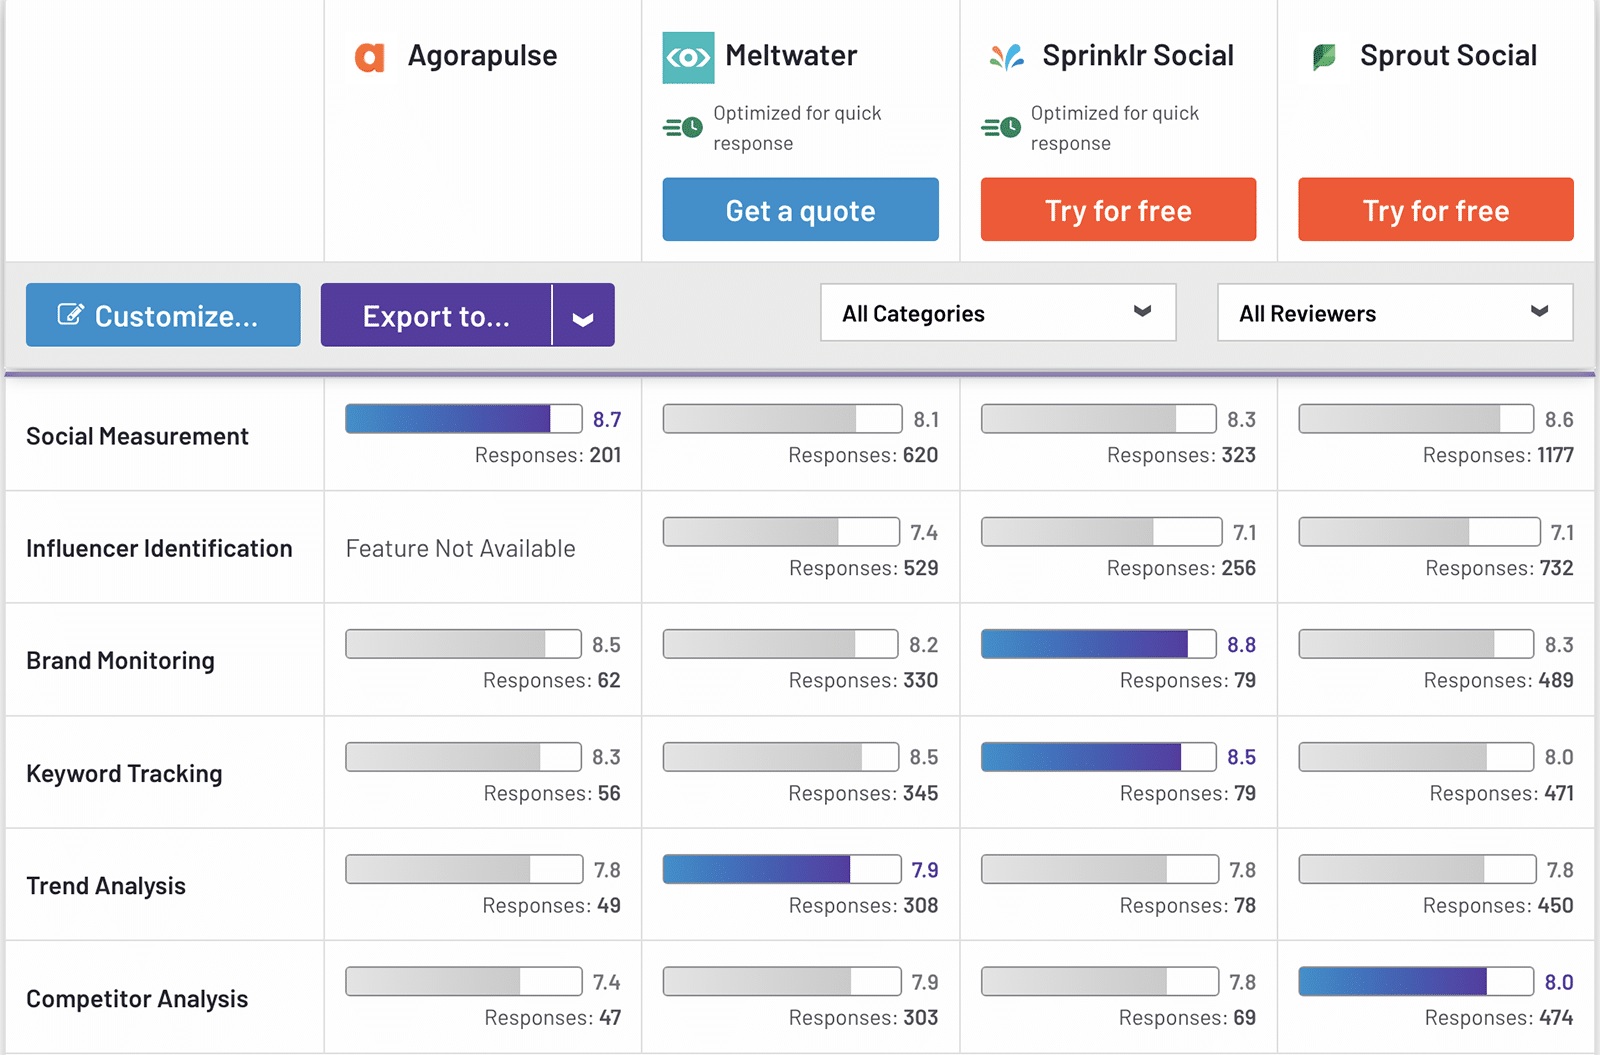 G2 comparison between Agorapulse, Meltwater, Sprinklr, and Sprout Social showing social listening